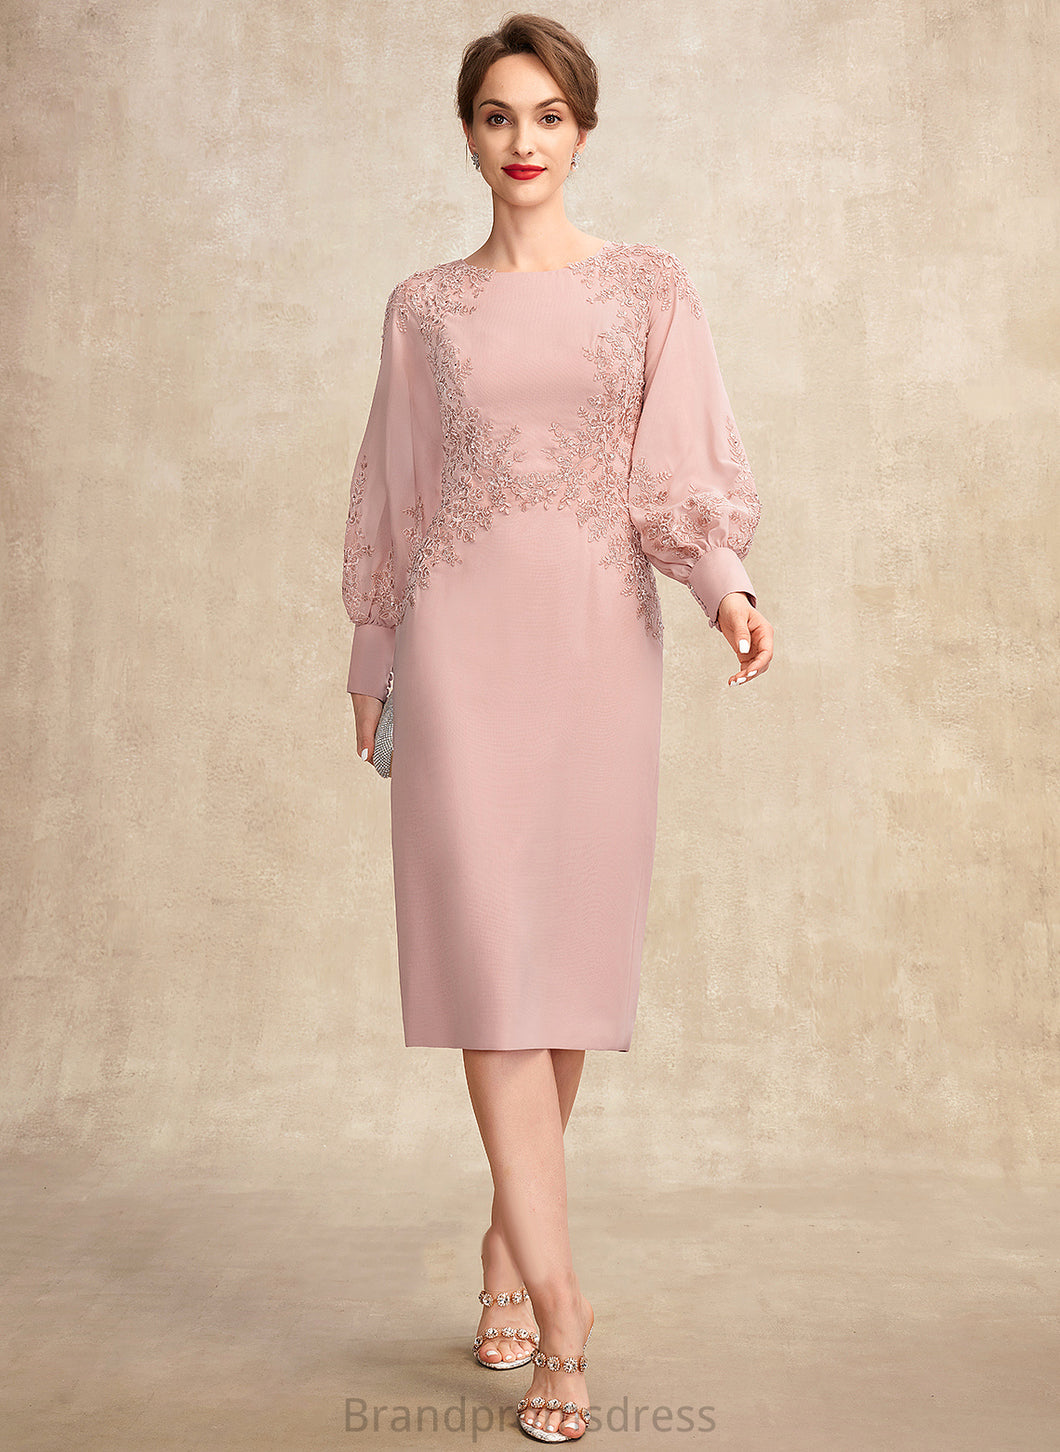 Mother of the Bride Dresses With Sequins Sheath/Column Scoop of Dress Beading Lace the Knee-Length Tracy Bride Mother Chiffon Neck